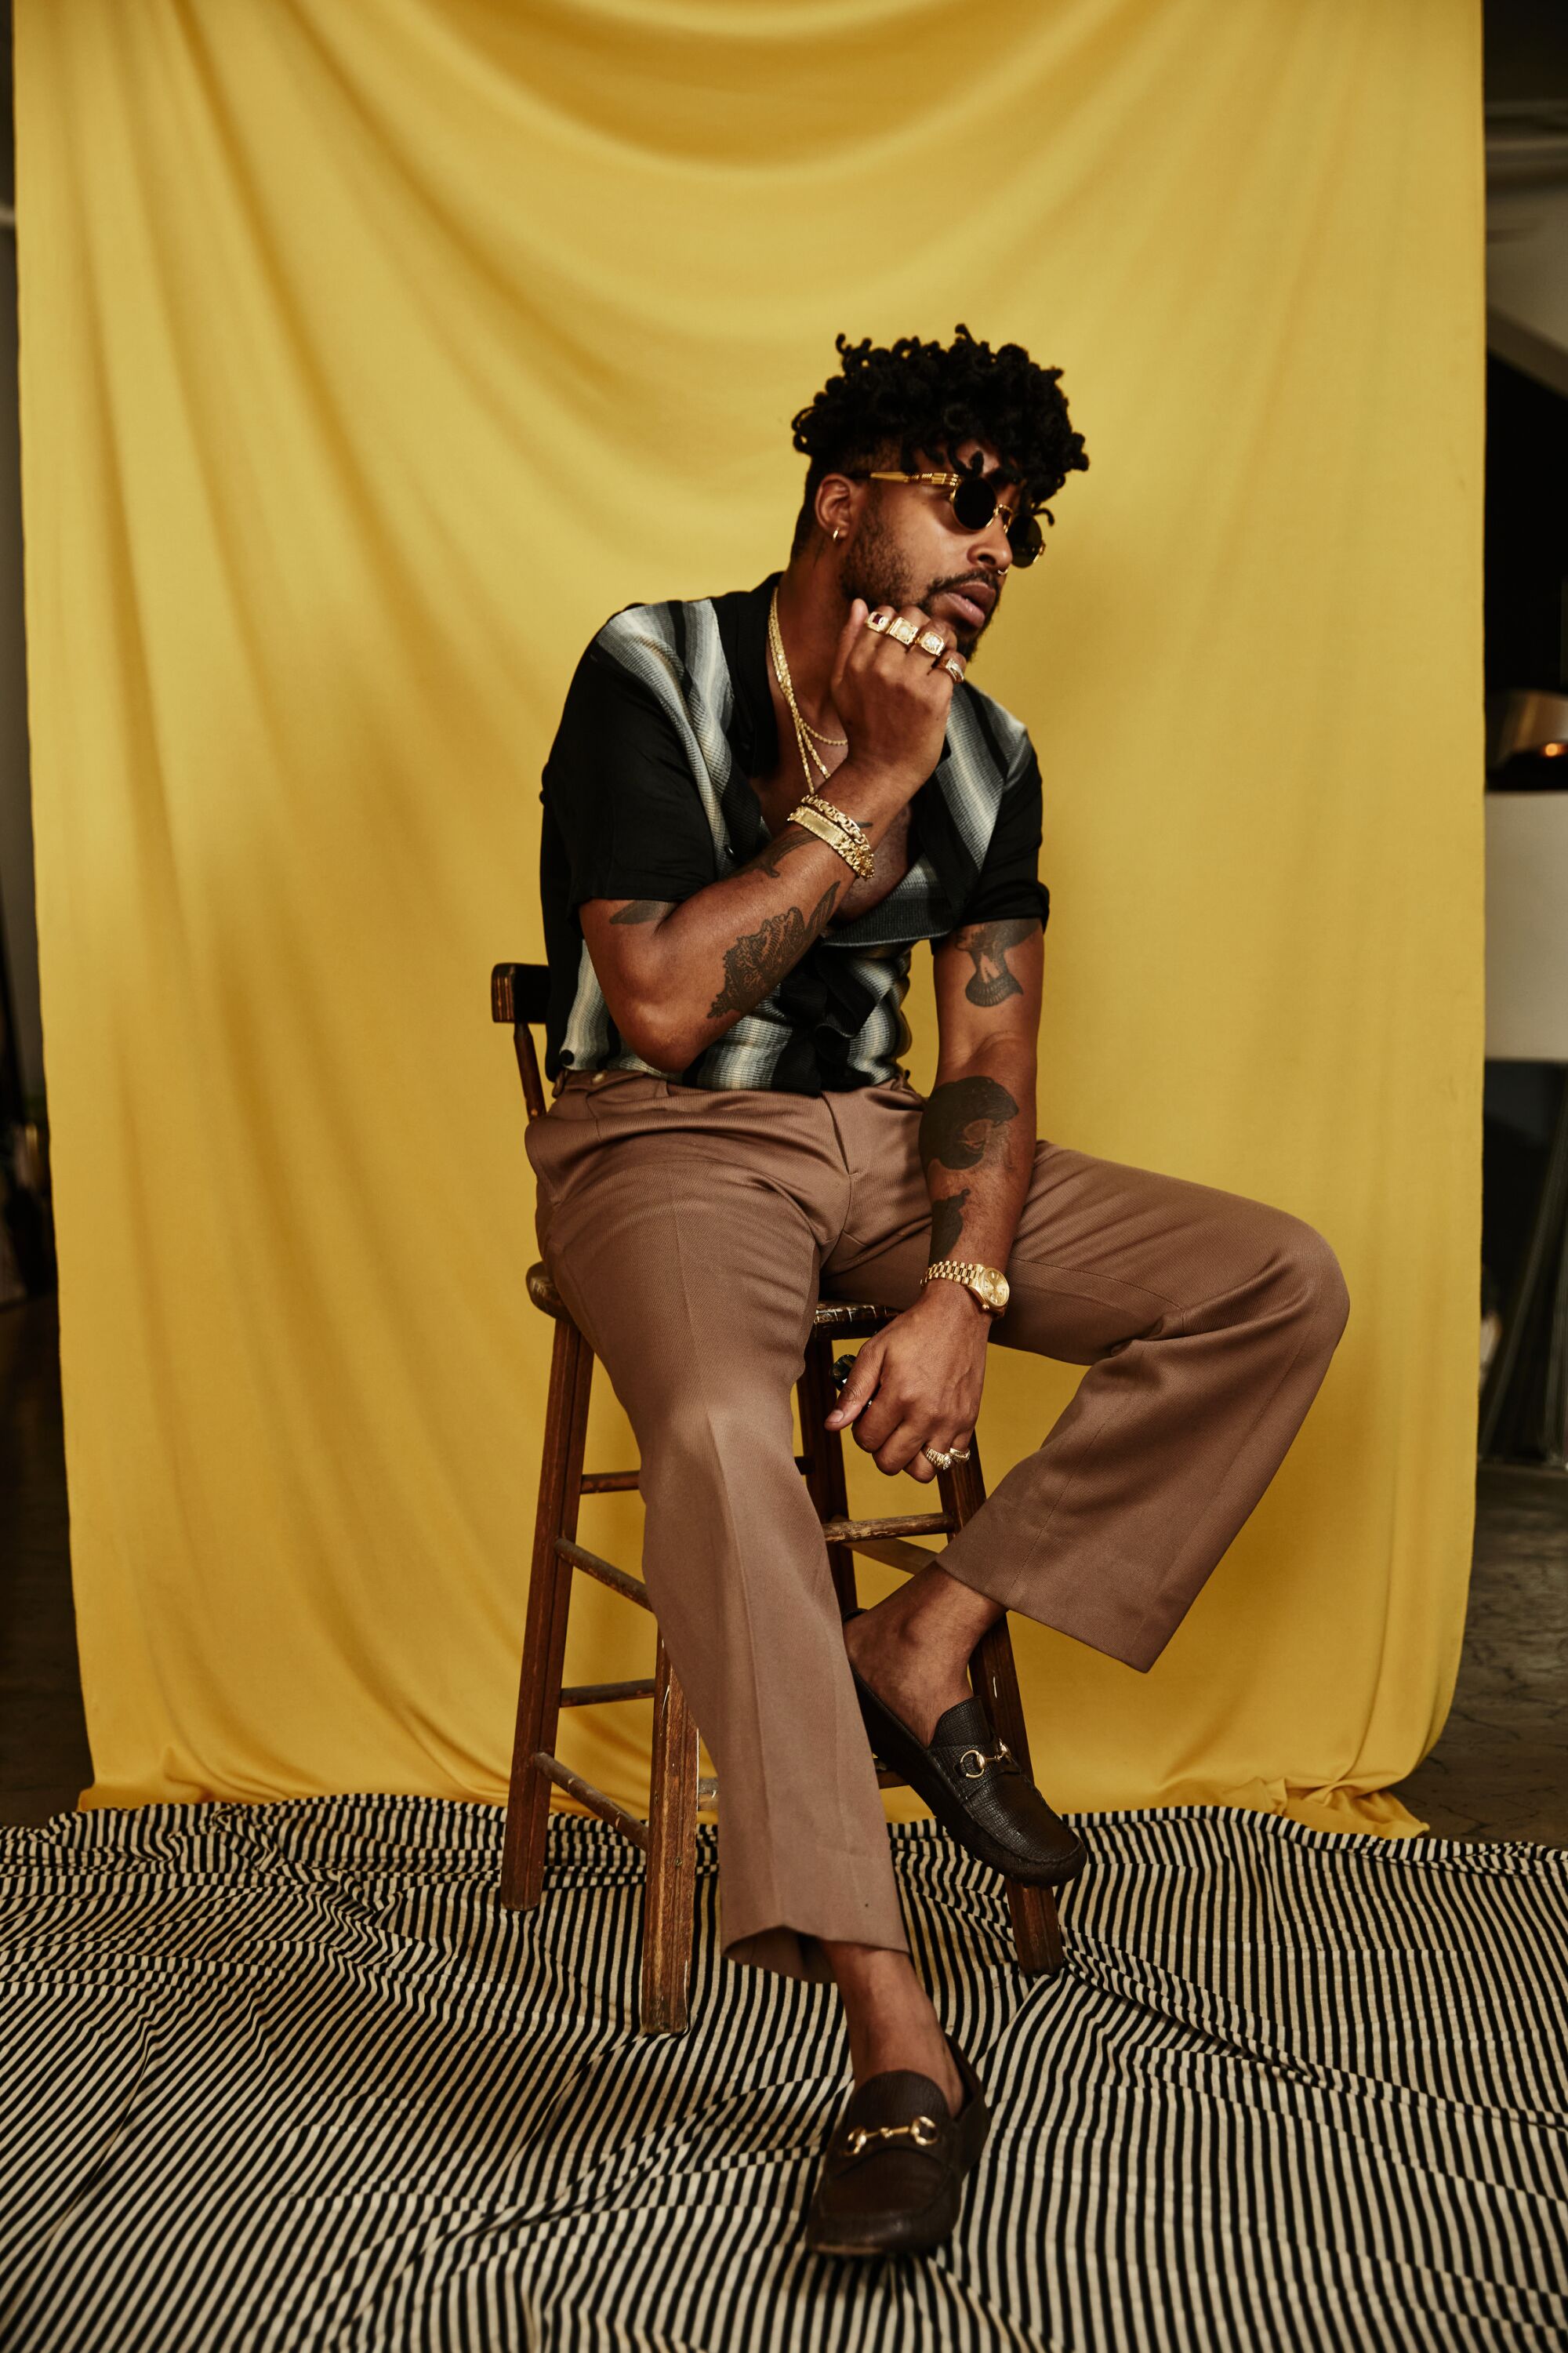 A man seated on a high chair in front of a yellow fabric backdrop.